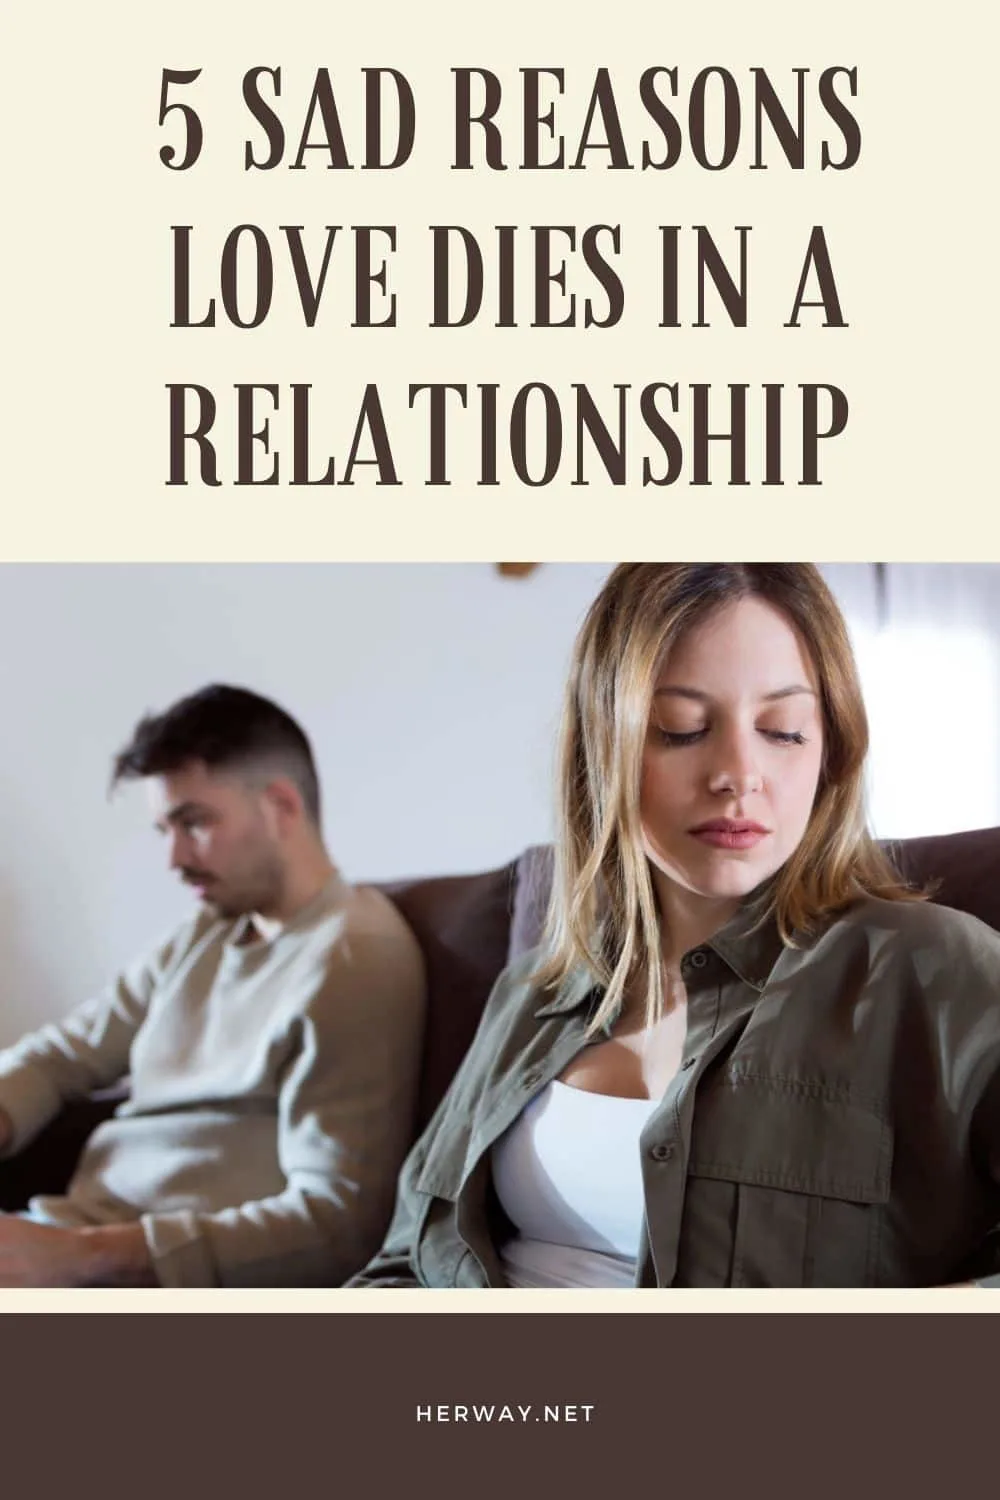 5 Sad Reasons Love Dies in a Relationship